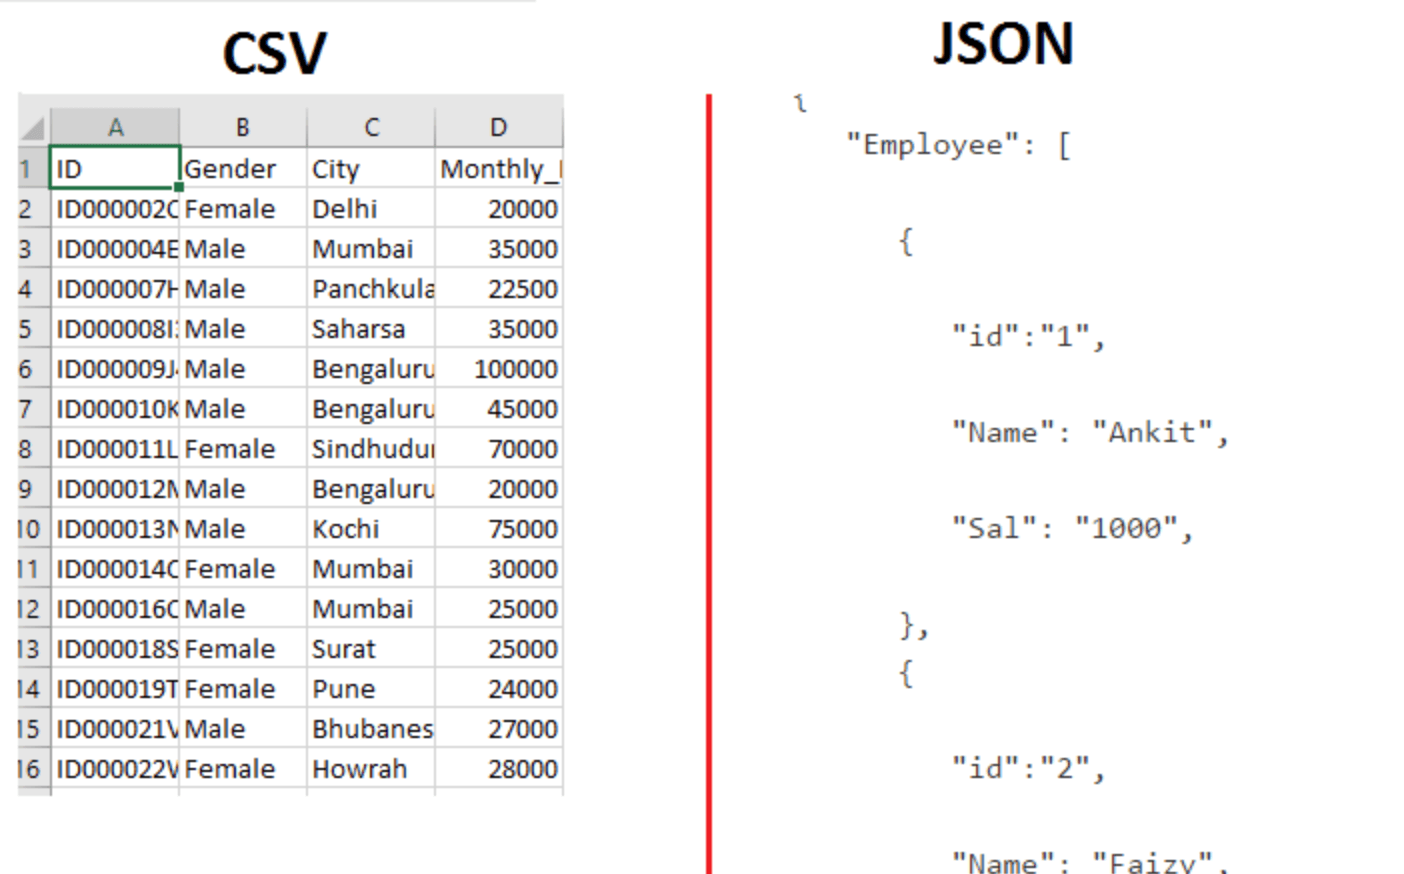 Comparison of CSV and JSON formats